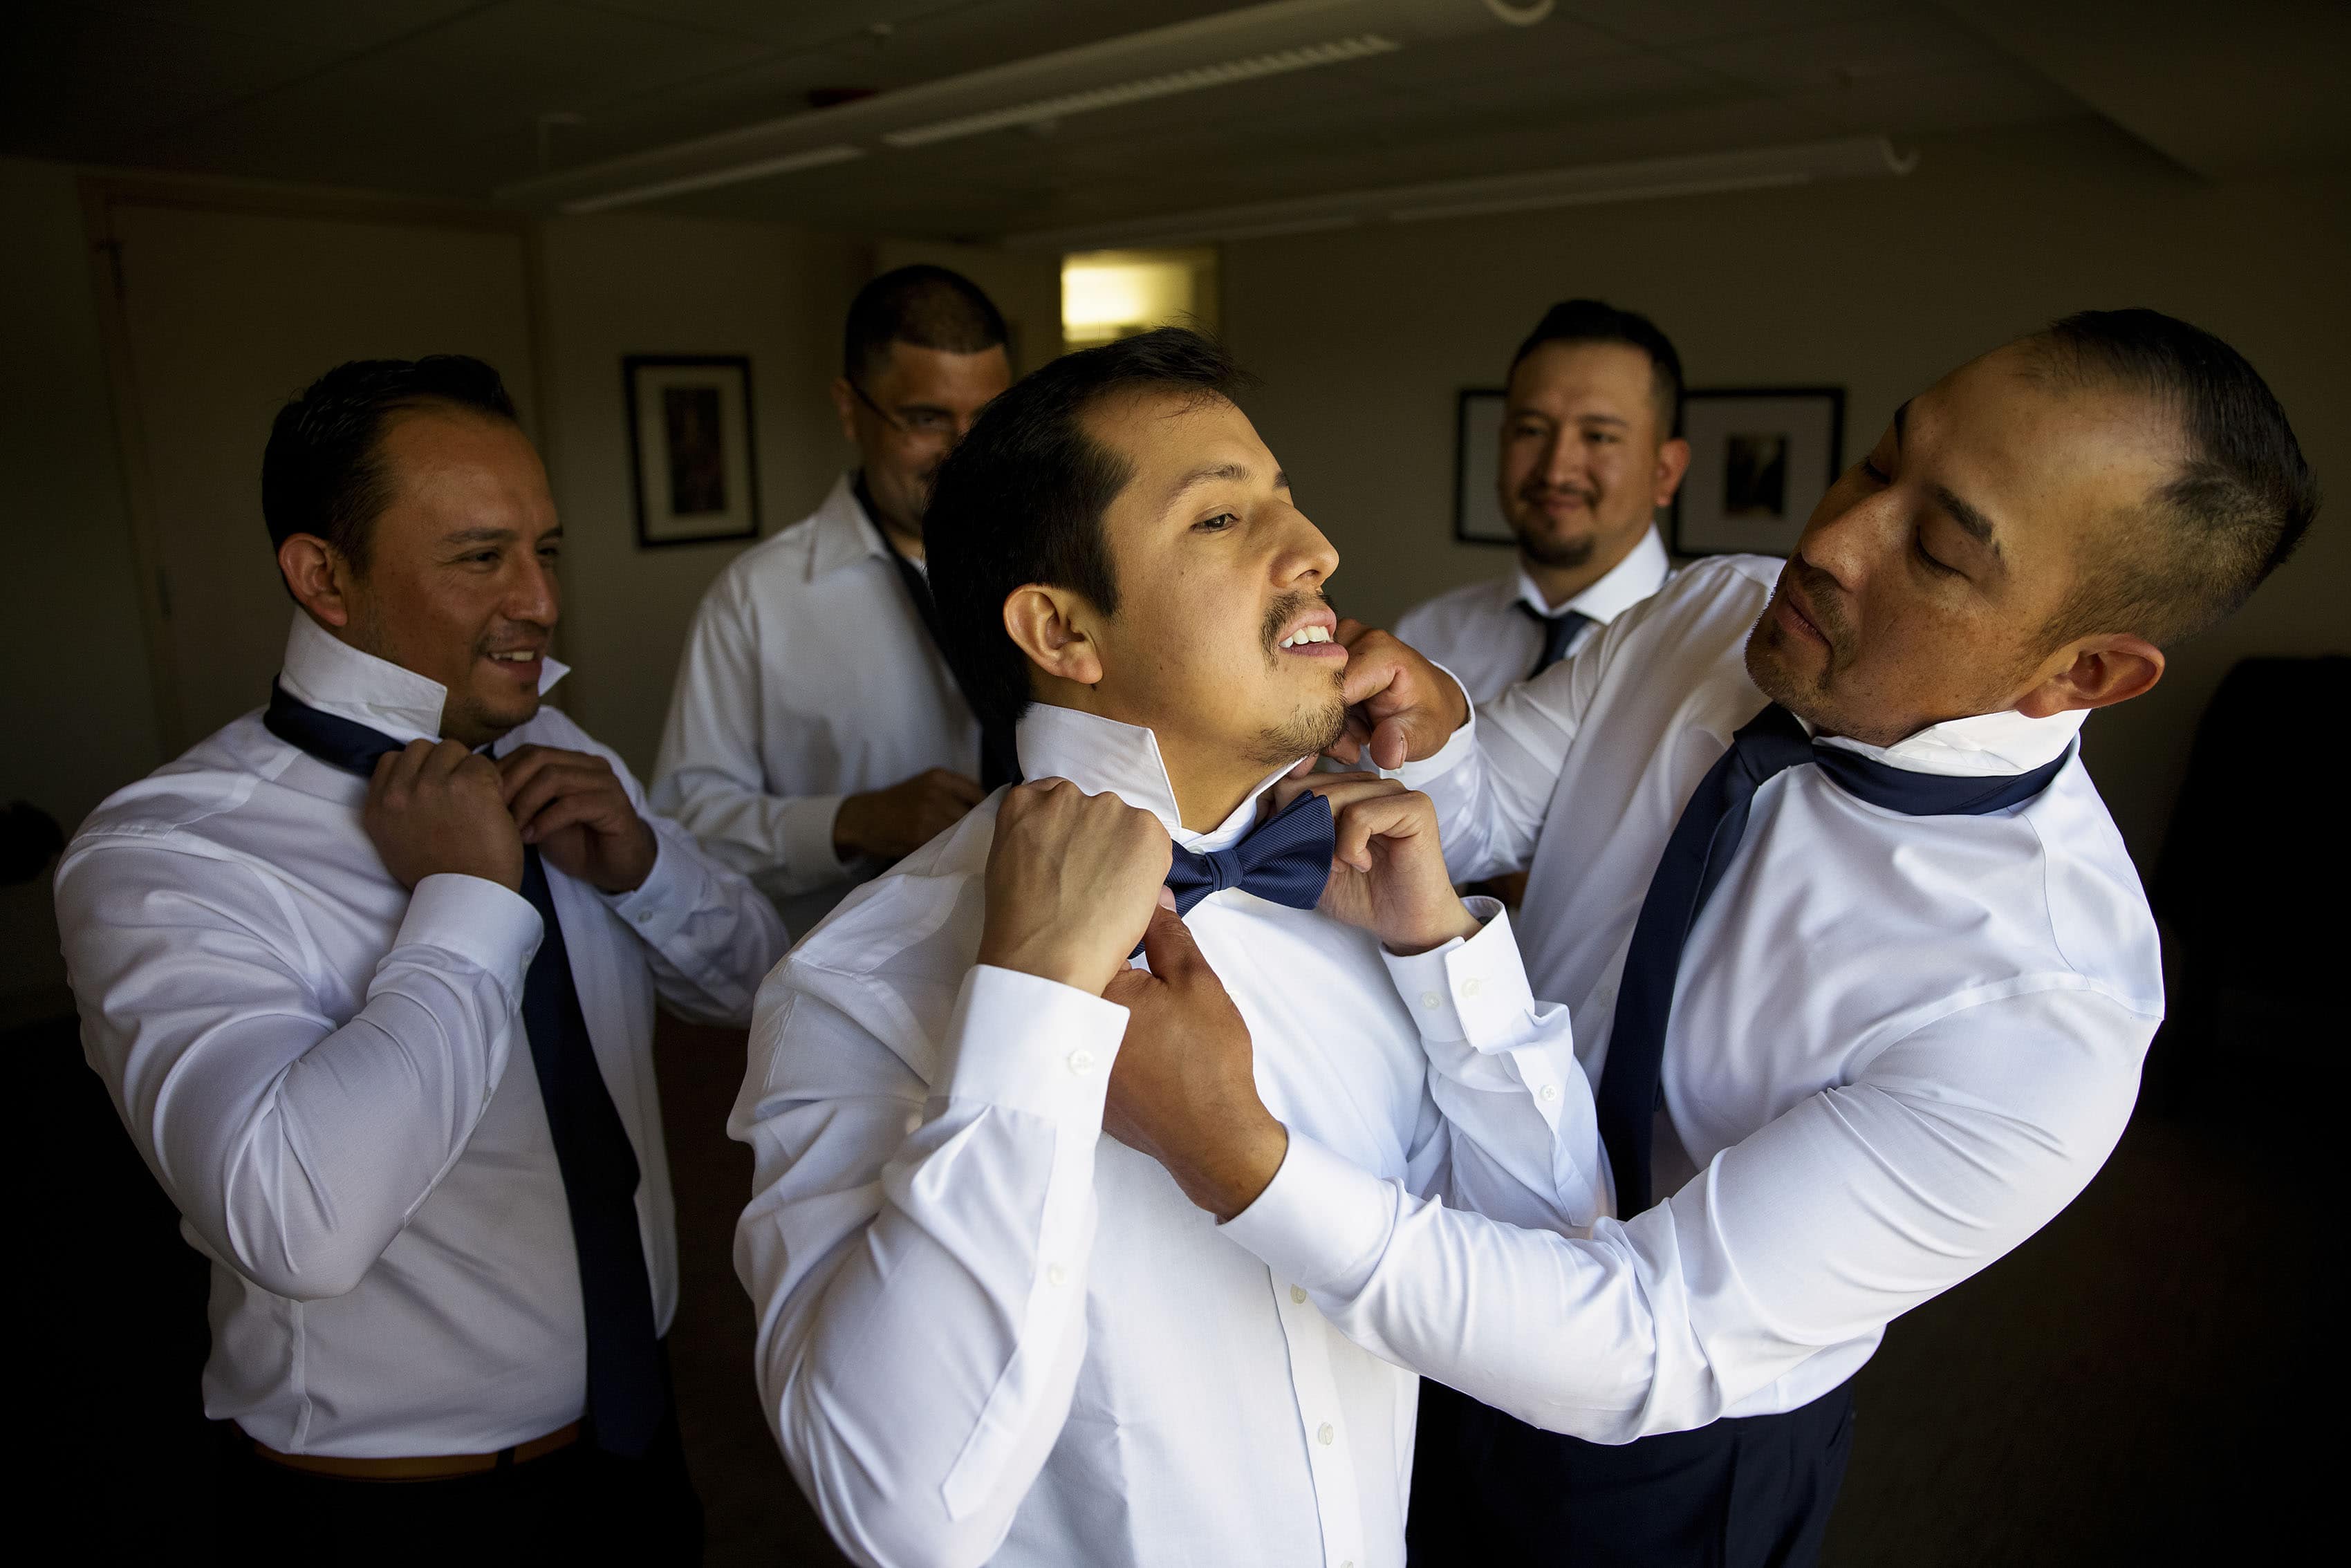 Eddy gets some help with his tie by one of his brothers before the wedding ceremony